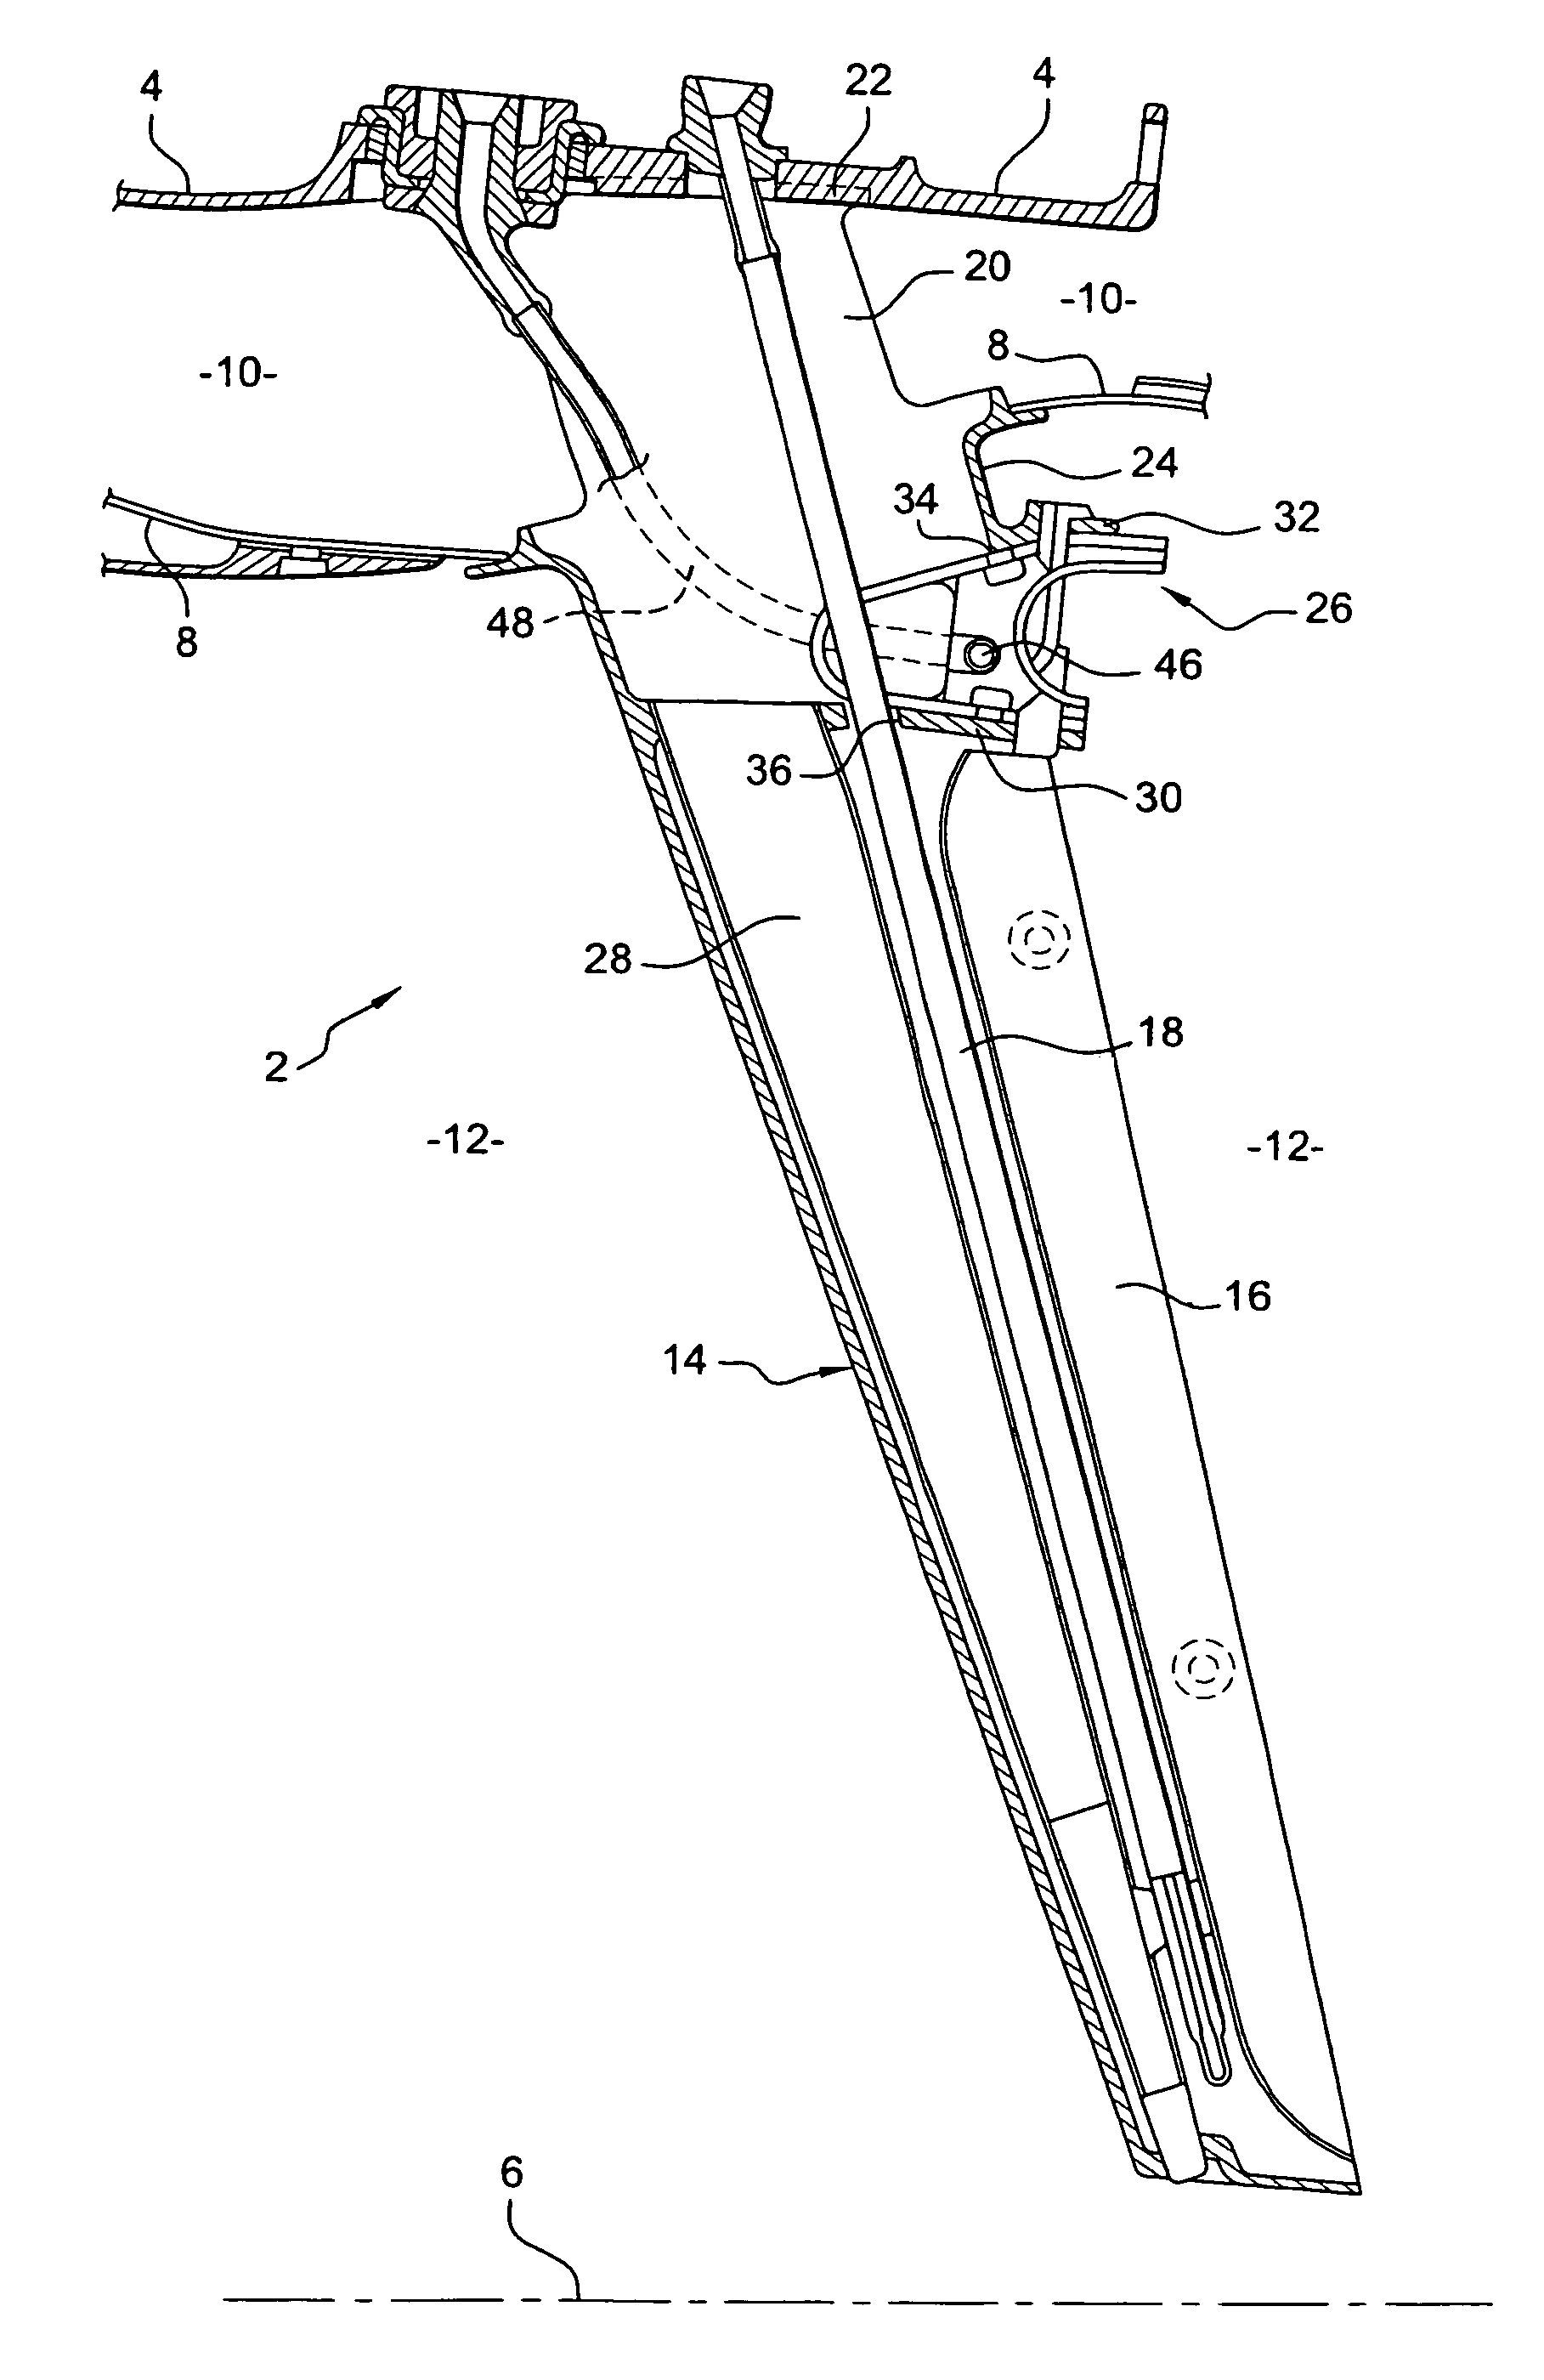 Device for feeding air and fuel to a burner ring in an after-burner chamber